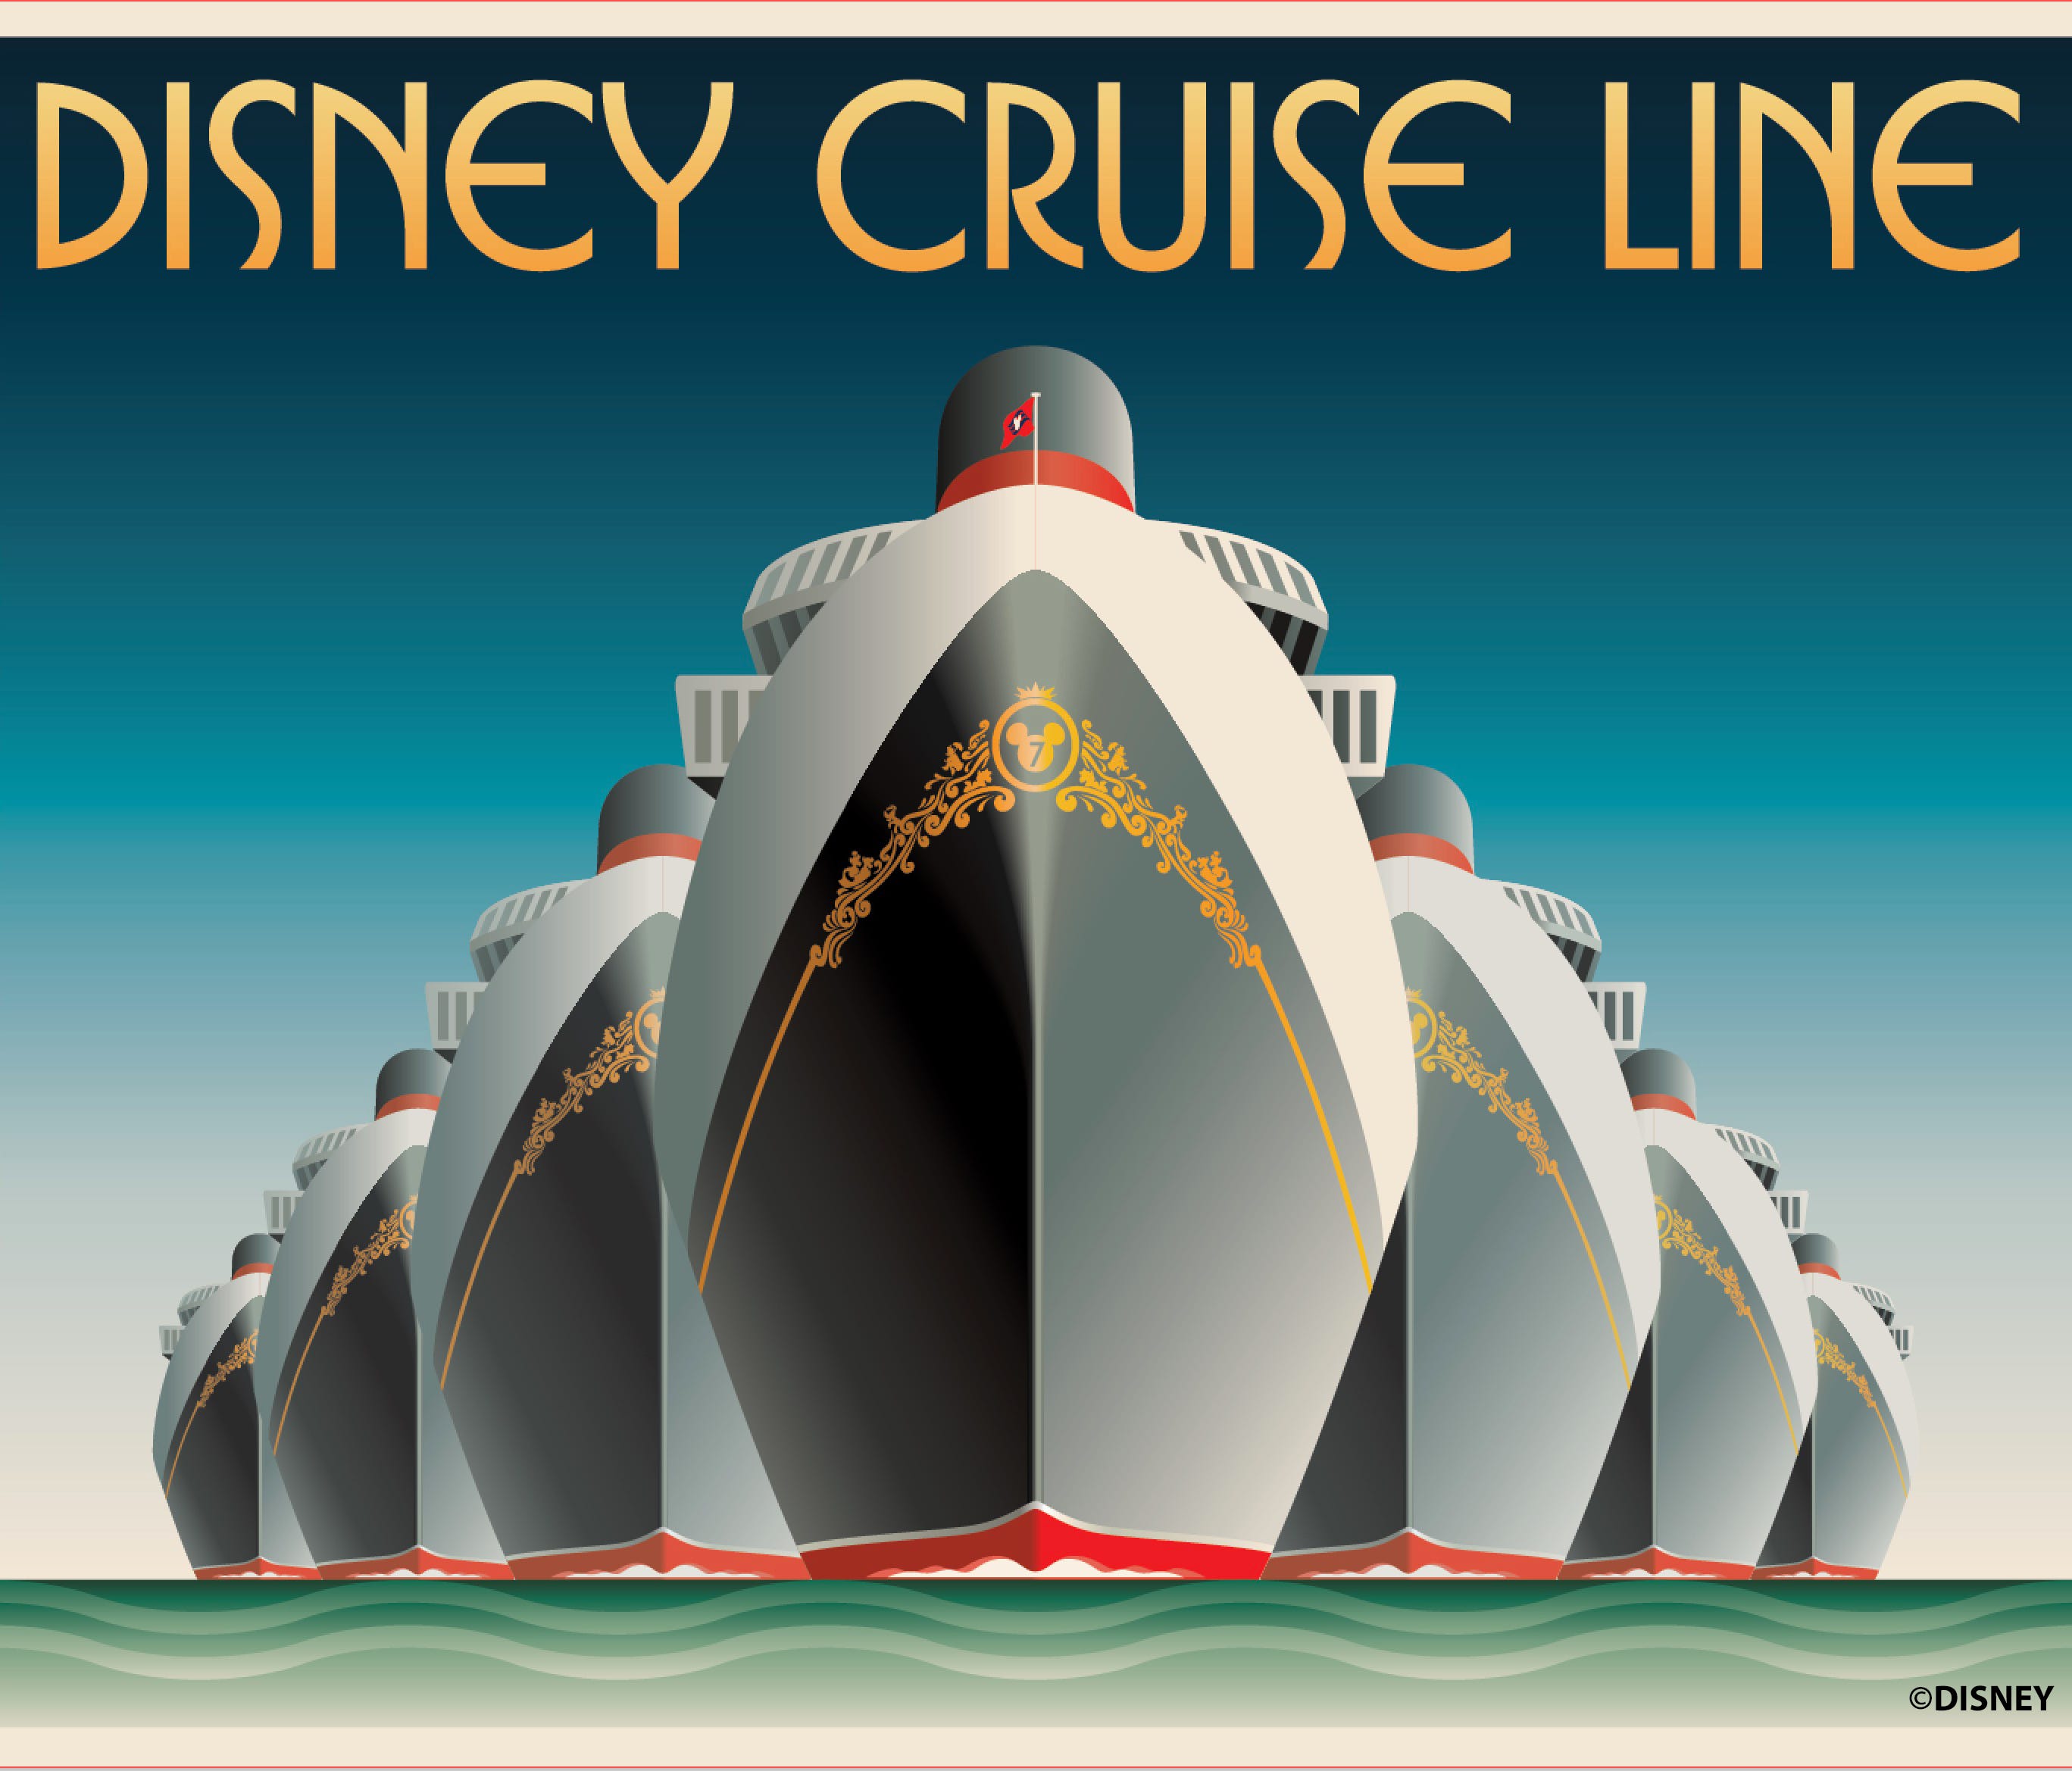 Disney Cruise Line will have seven cruise ships by 2023.